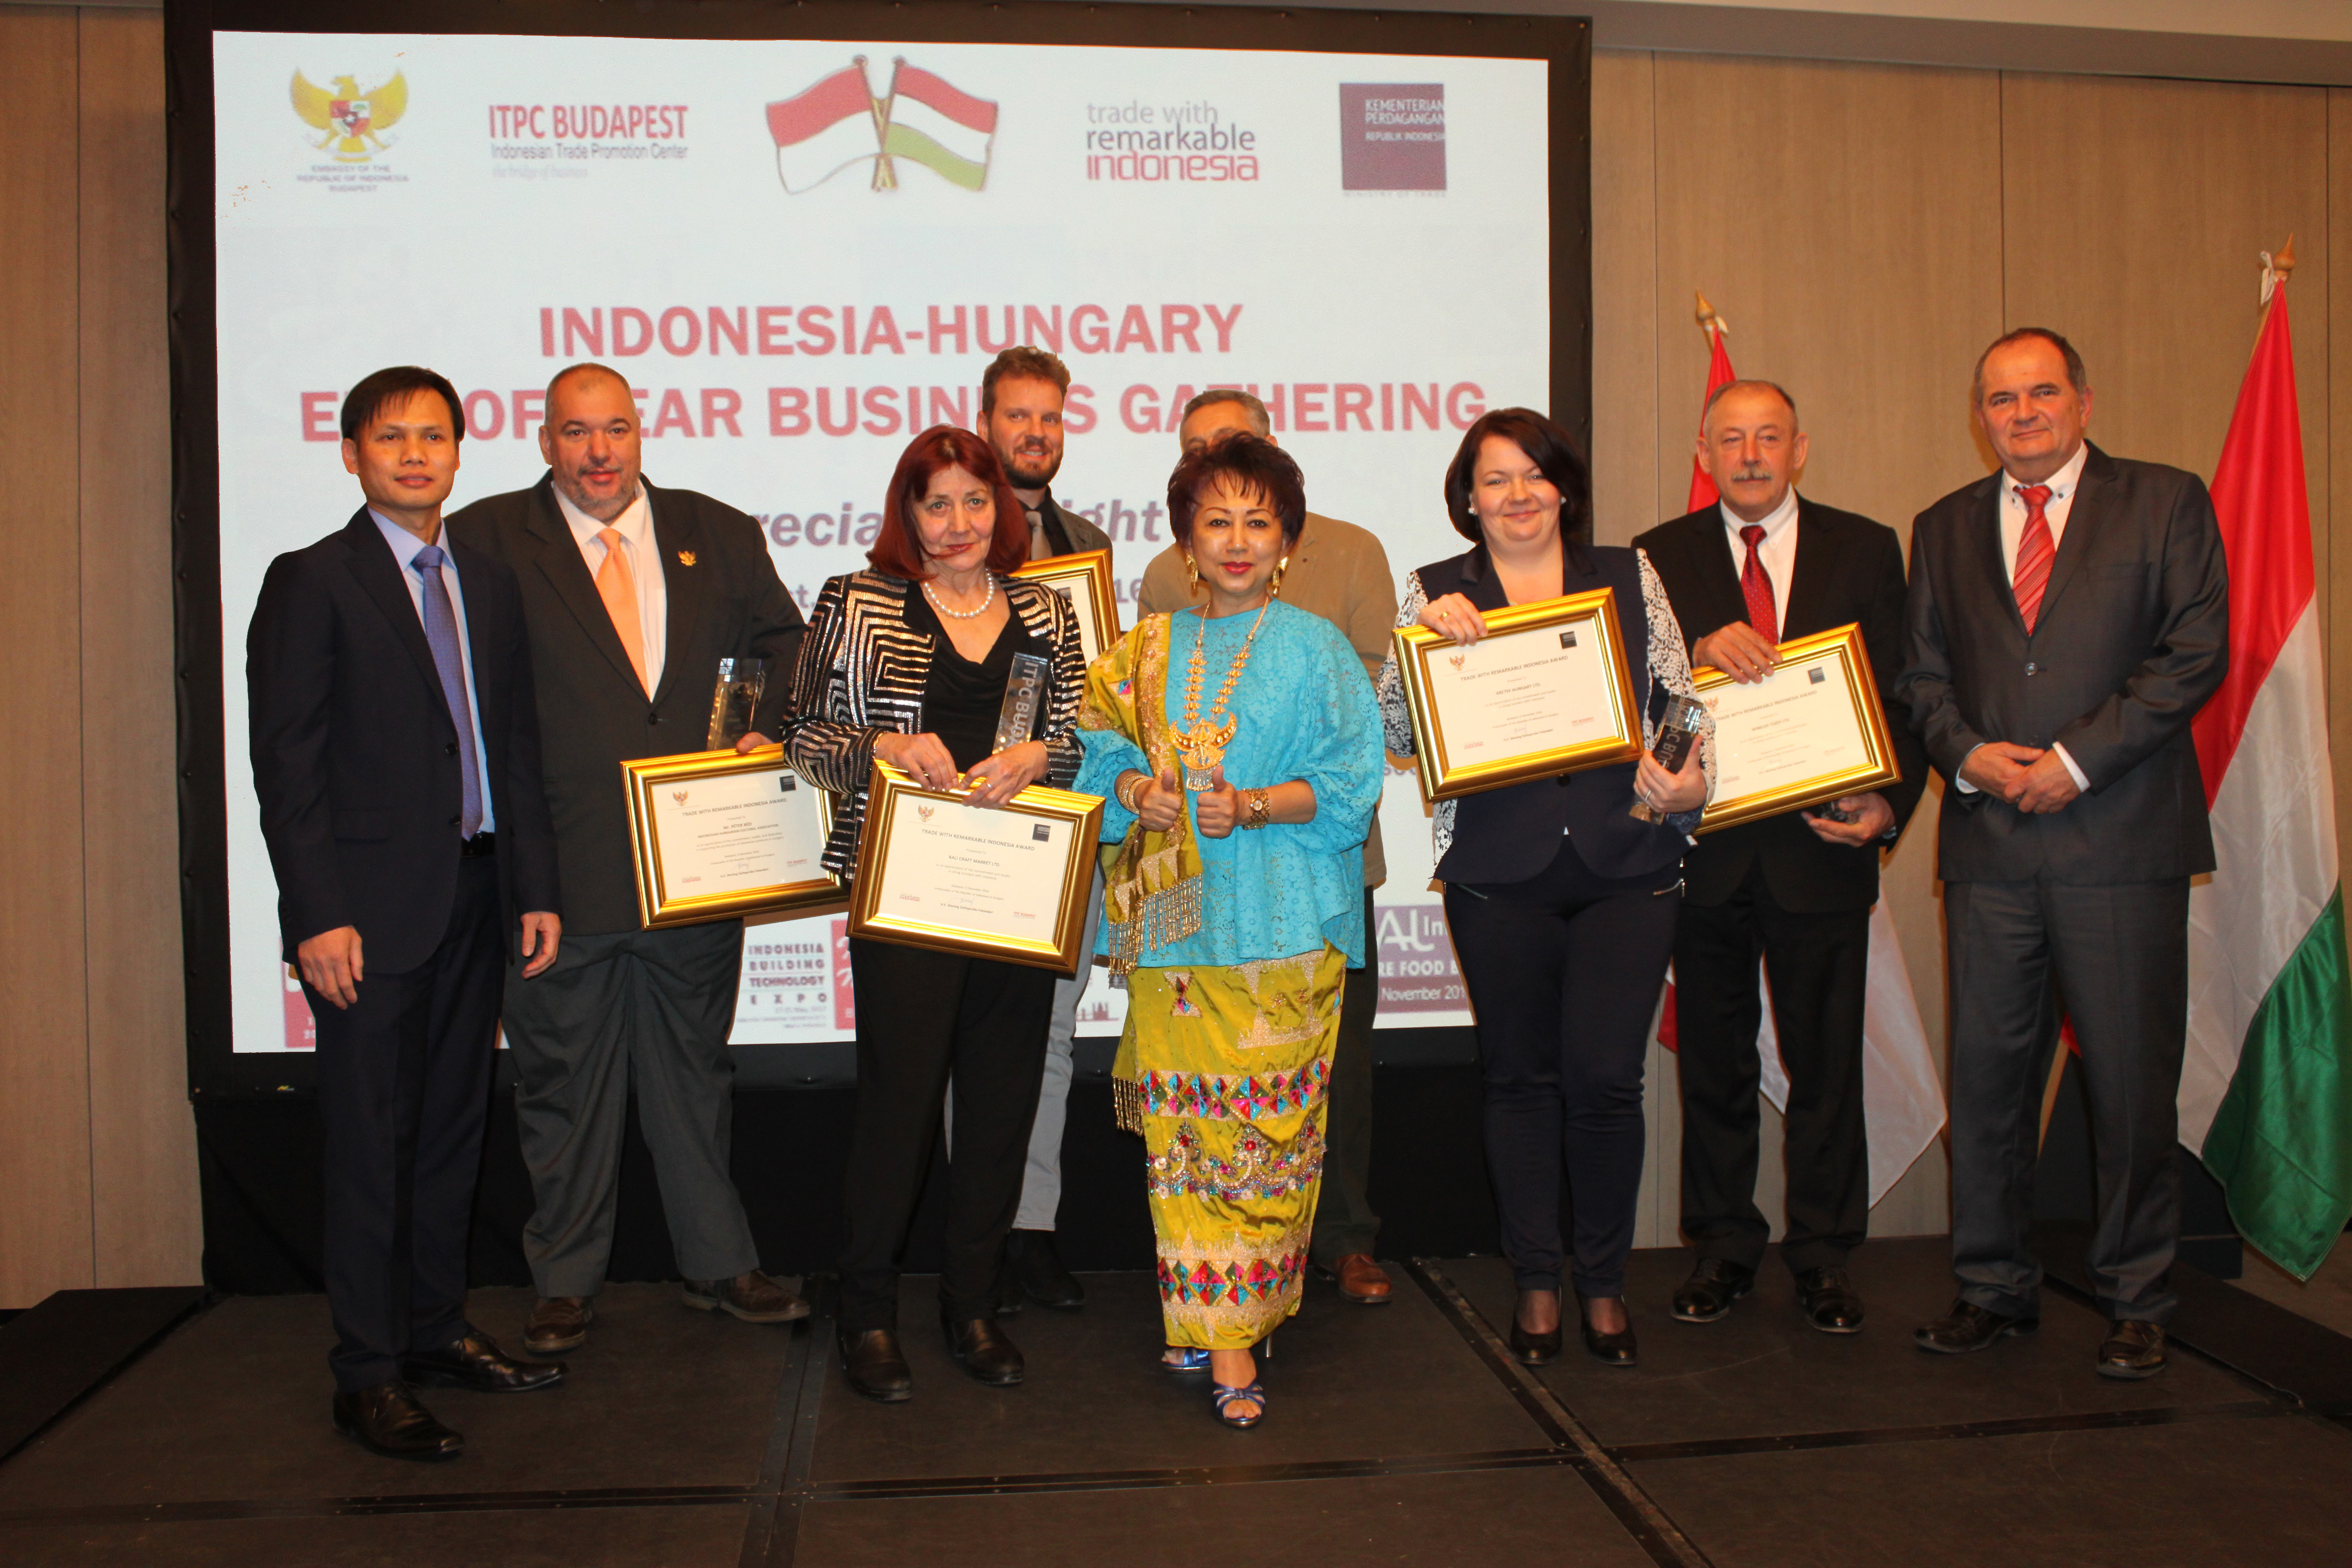 INDONESIA – HUNGARY END OF YEAR BUSINESS GATHERING AND 